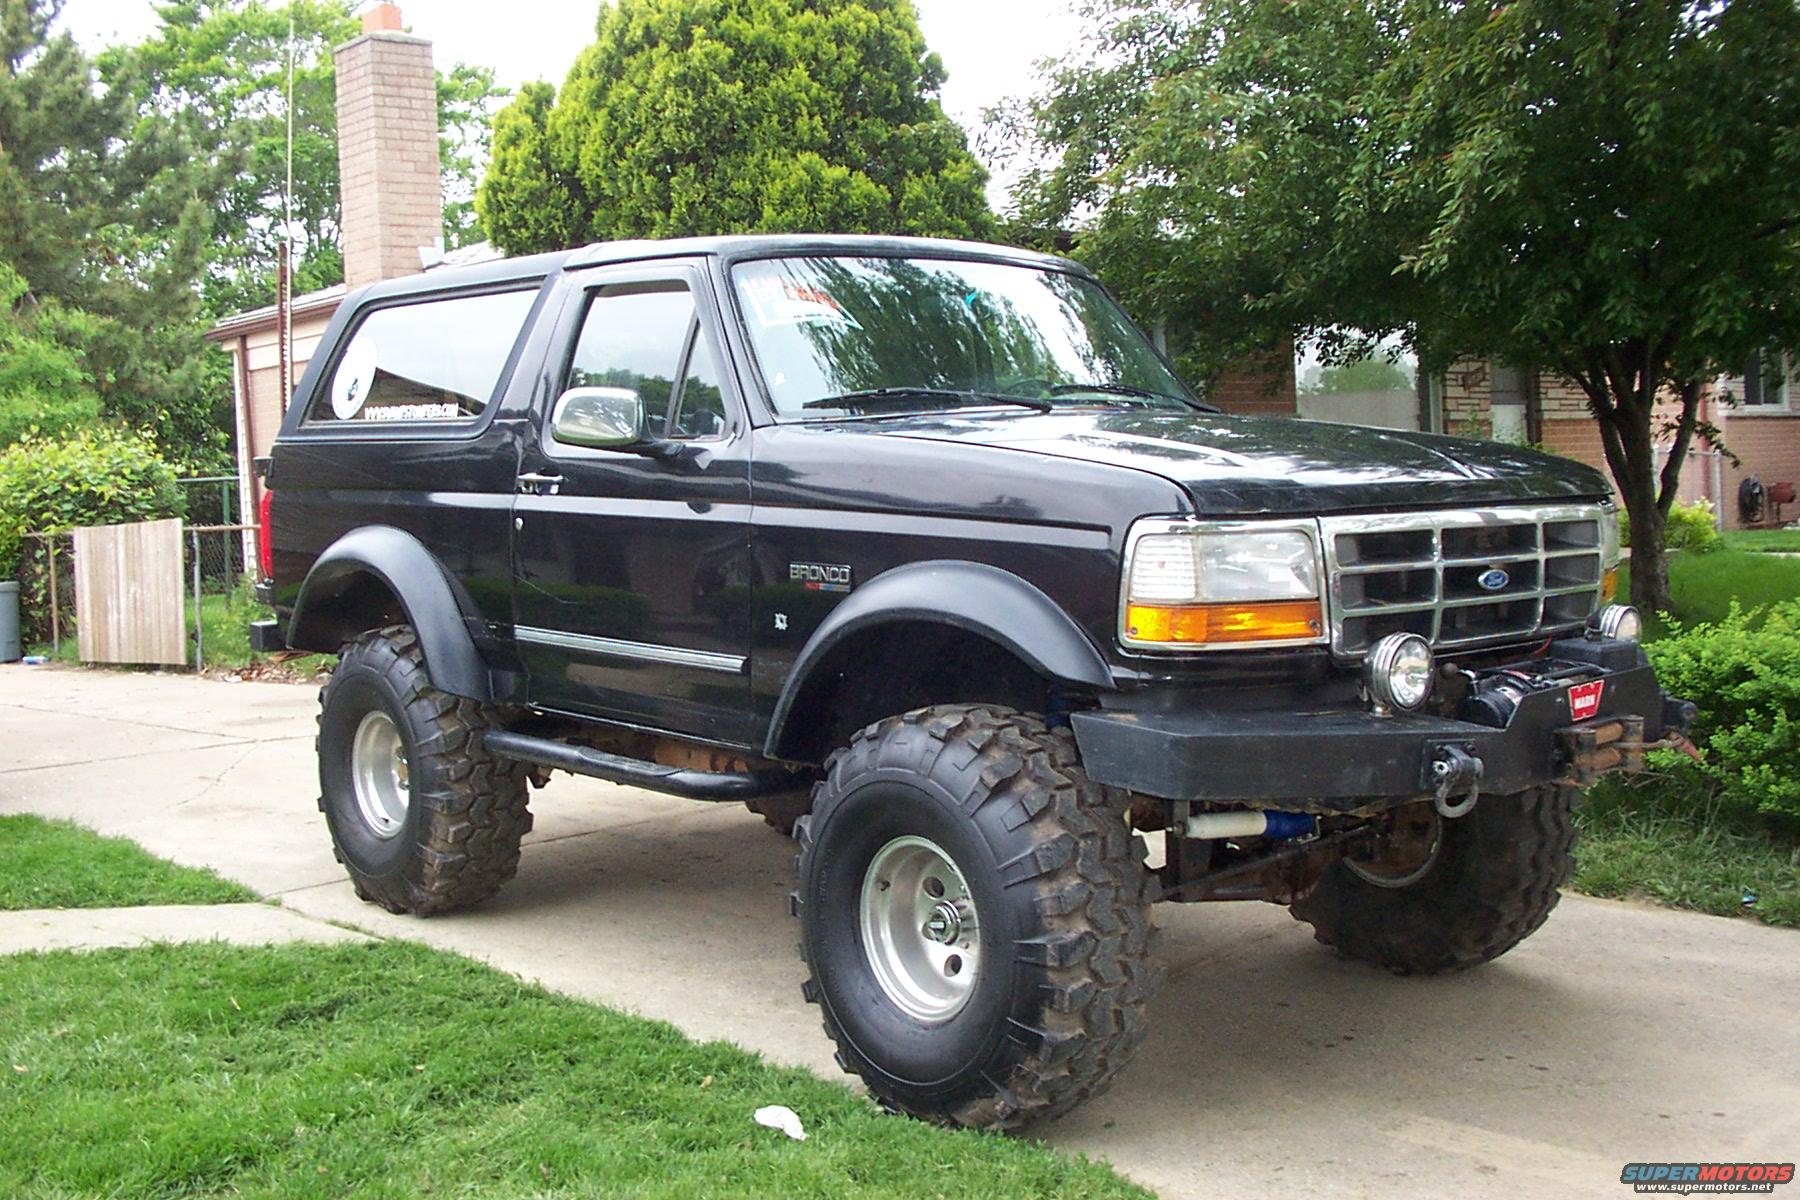 1995 Ford bronco custom bumpers #3